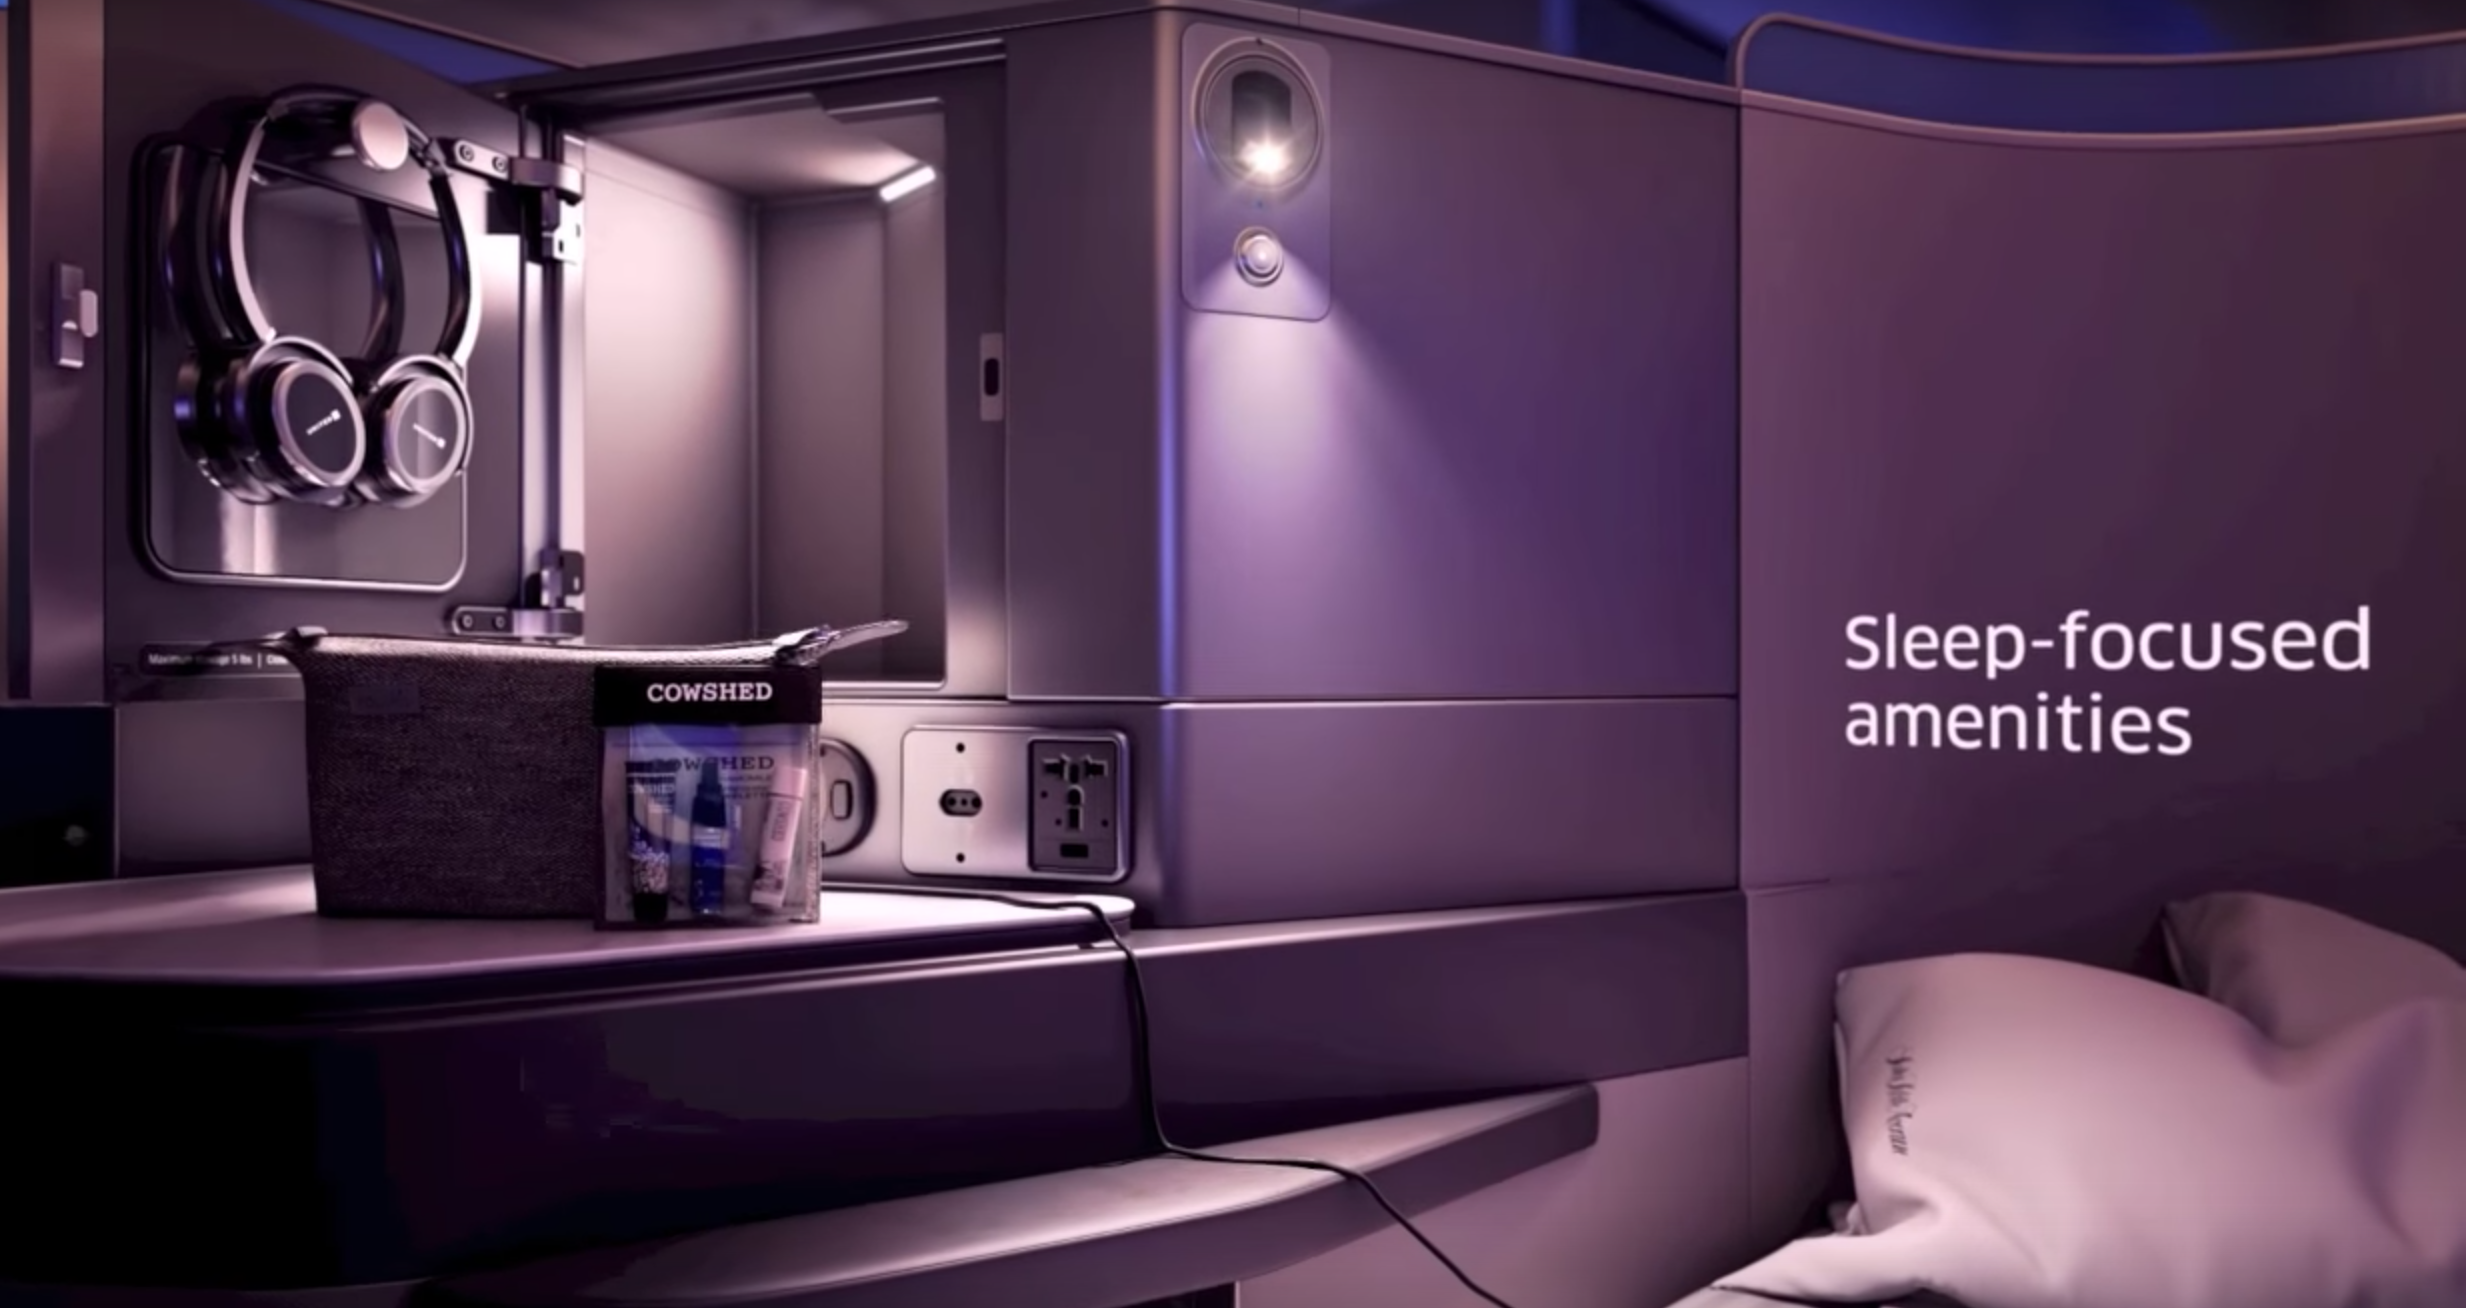 United Hopes To Draw Rich Business Travelers With Business Class Isolation Pod Seats